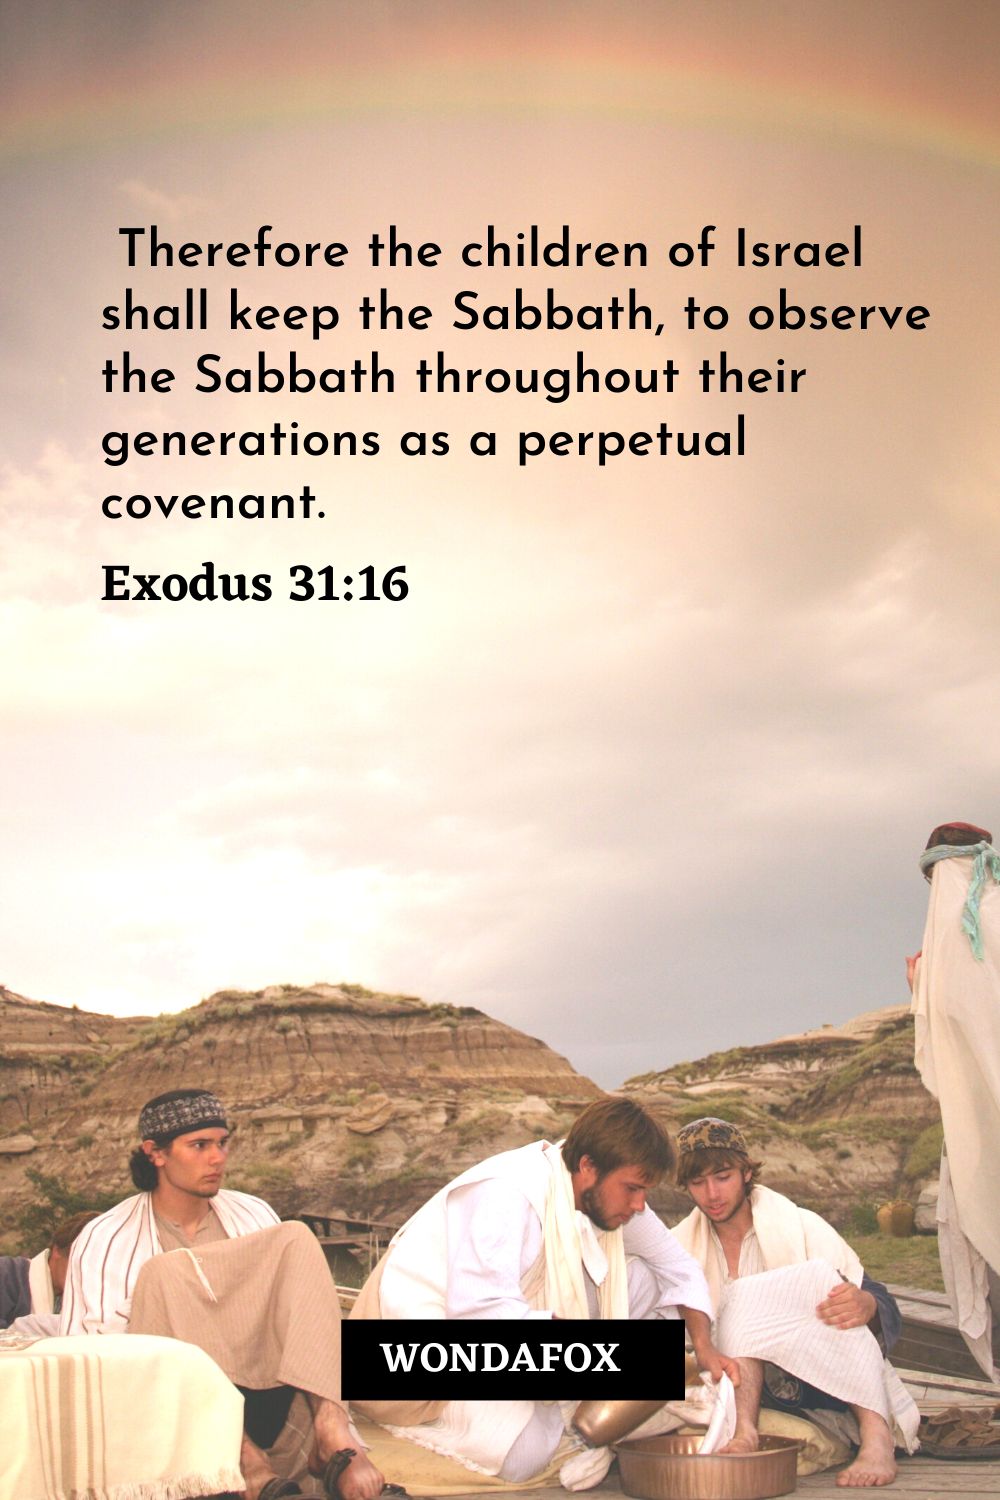 Therefore the children of Israel shall keep the Sabbath, to observe the Sabbath throughout their generations as a perpetual covenant.
Exodus 31:16